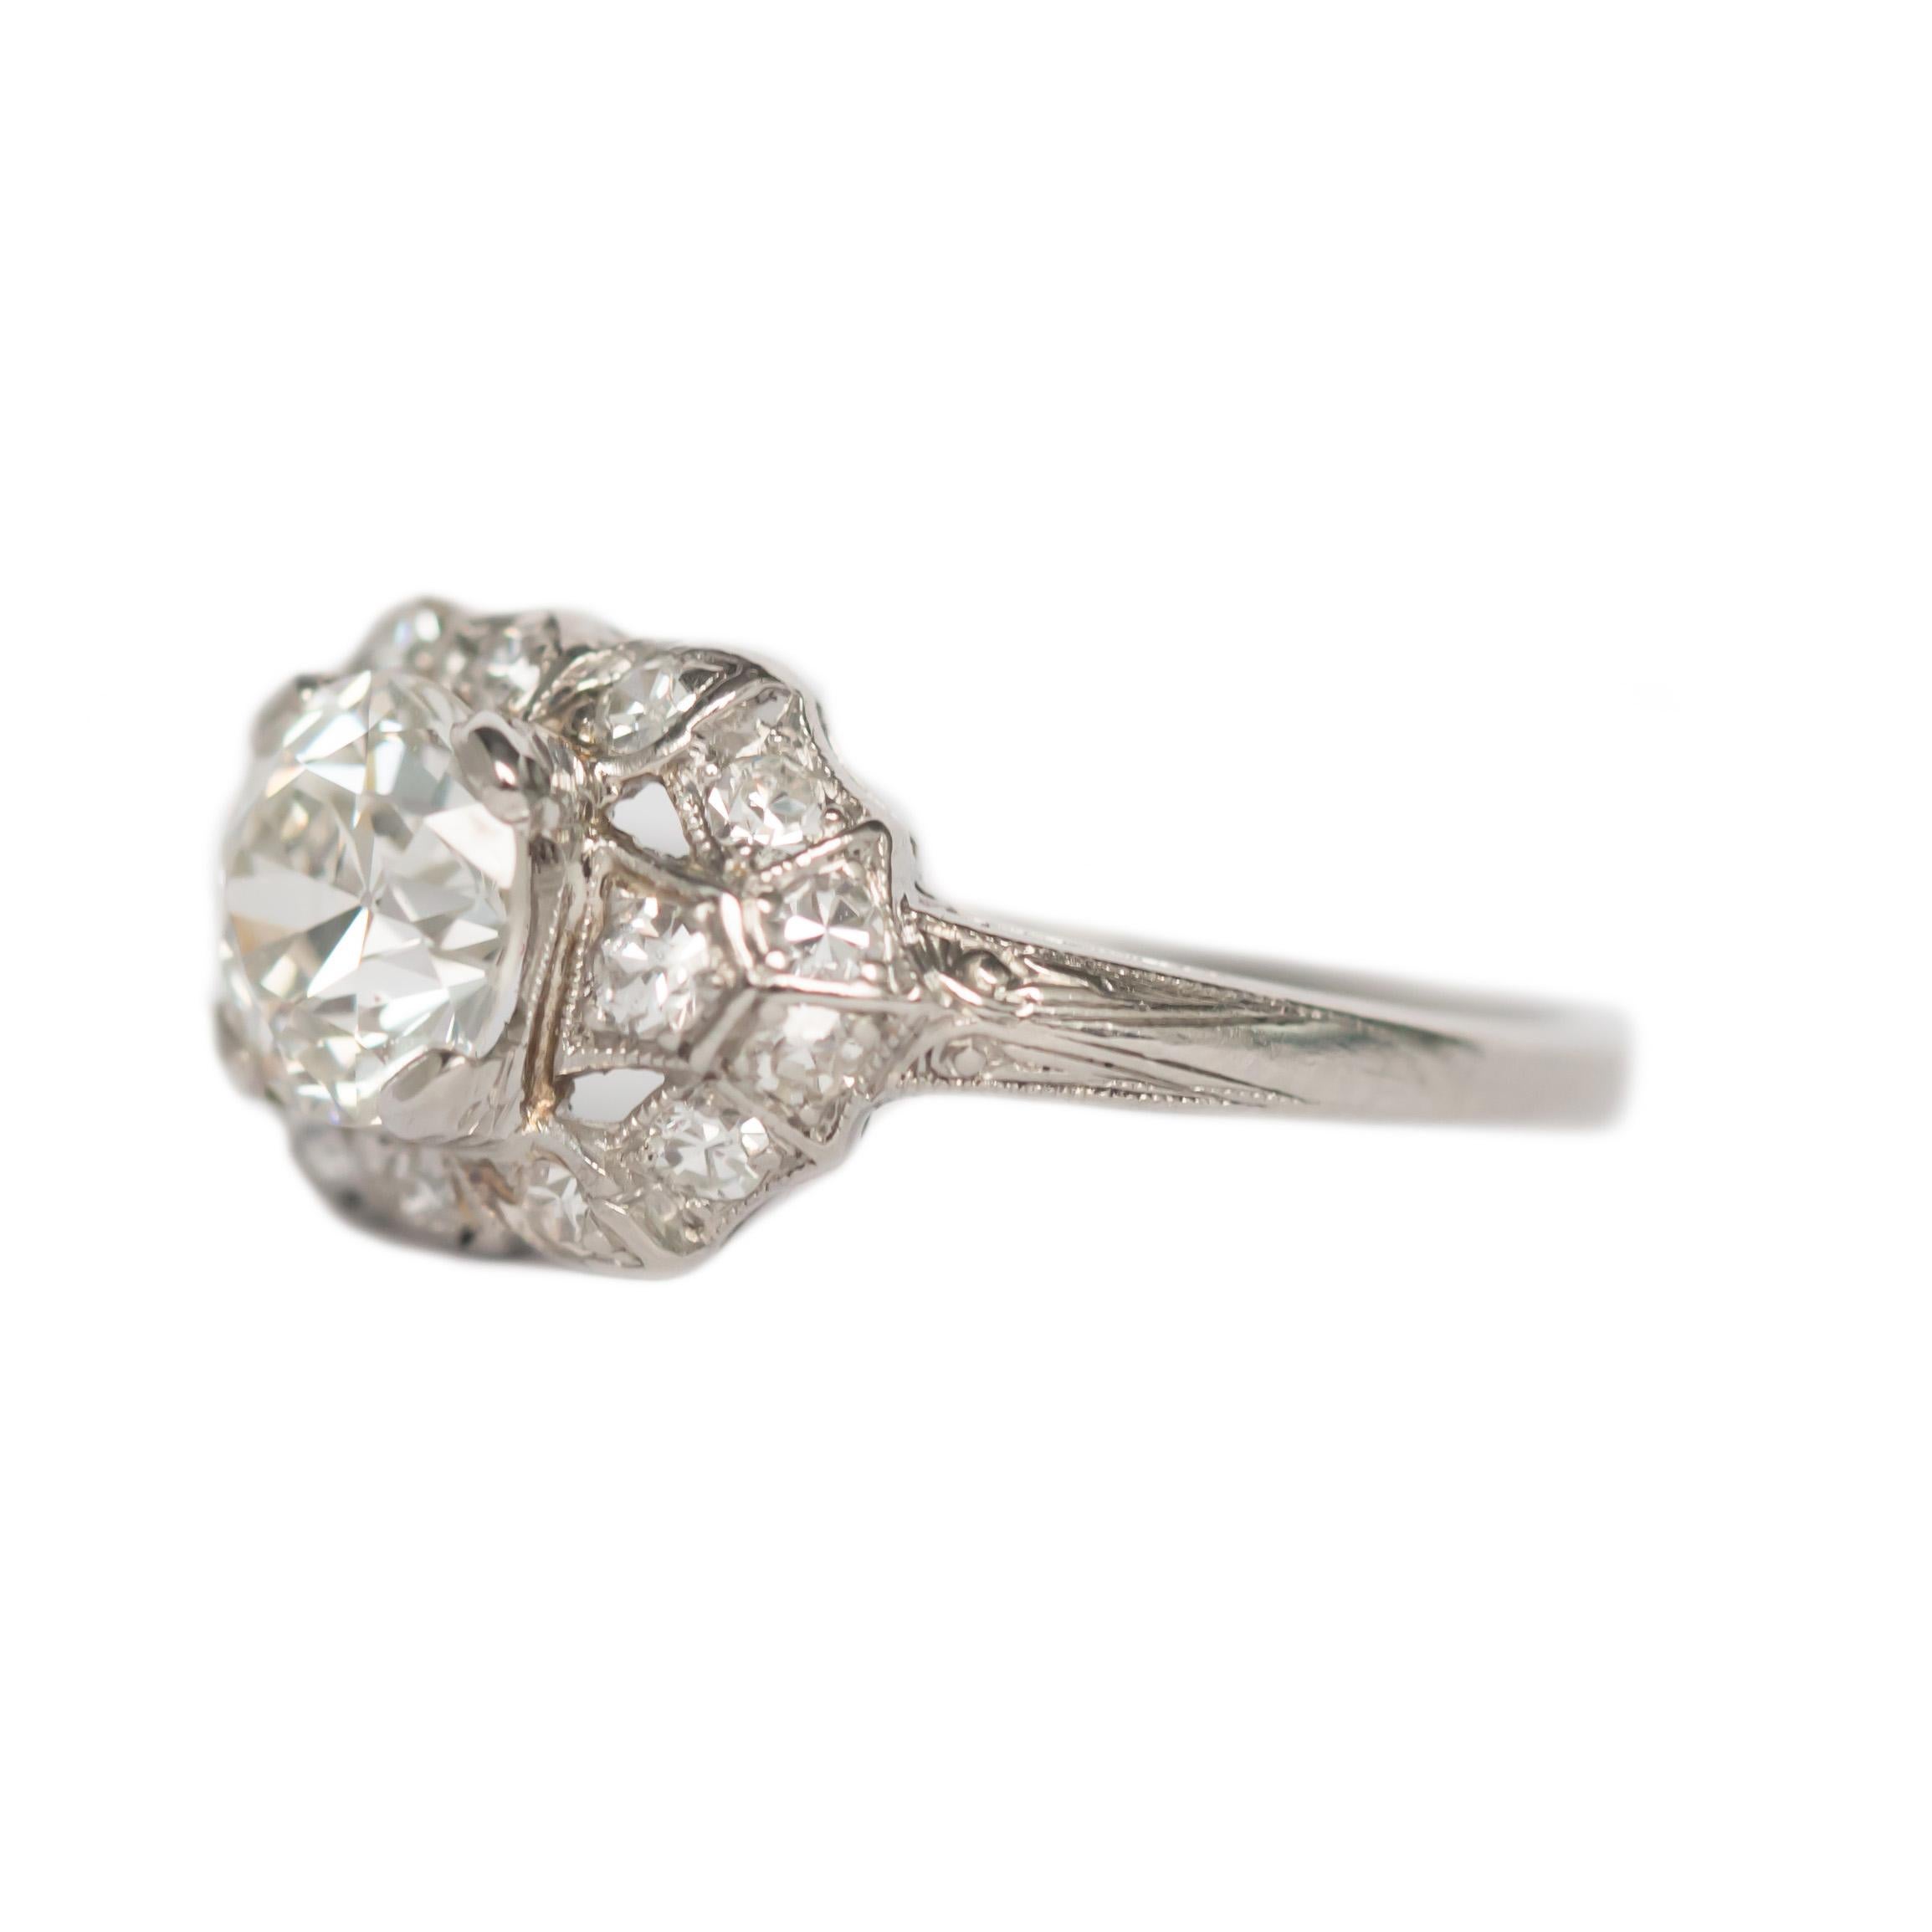 Ring Size: 5.75
Metal Type: Platinum [Hallmarked, and Tested]
Weight: 3.4 grams

Center Diamond Details:
GIA REPORT #5201986347
Weight: 1.03ct
Cut: Old Mine Brilliant
Color: J
Clarity: VS1

Side Diamond Details:
Weight: .20 carat, total weight
Cut: